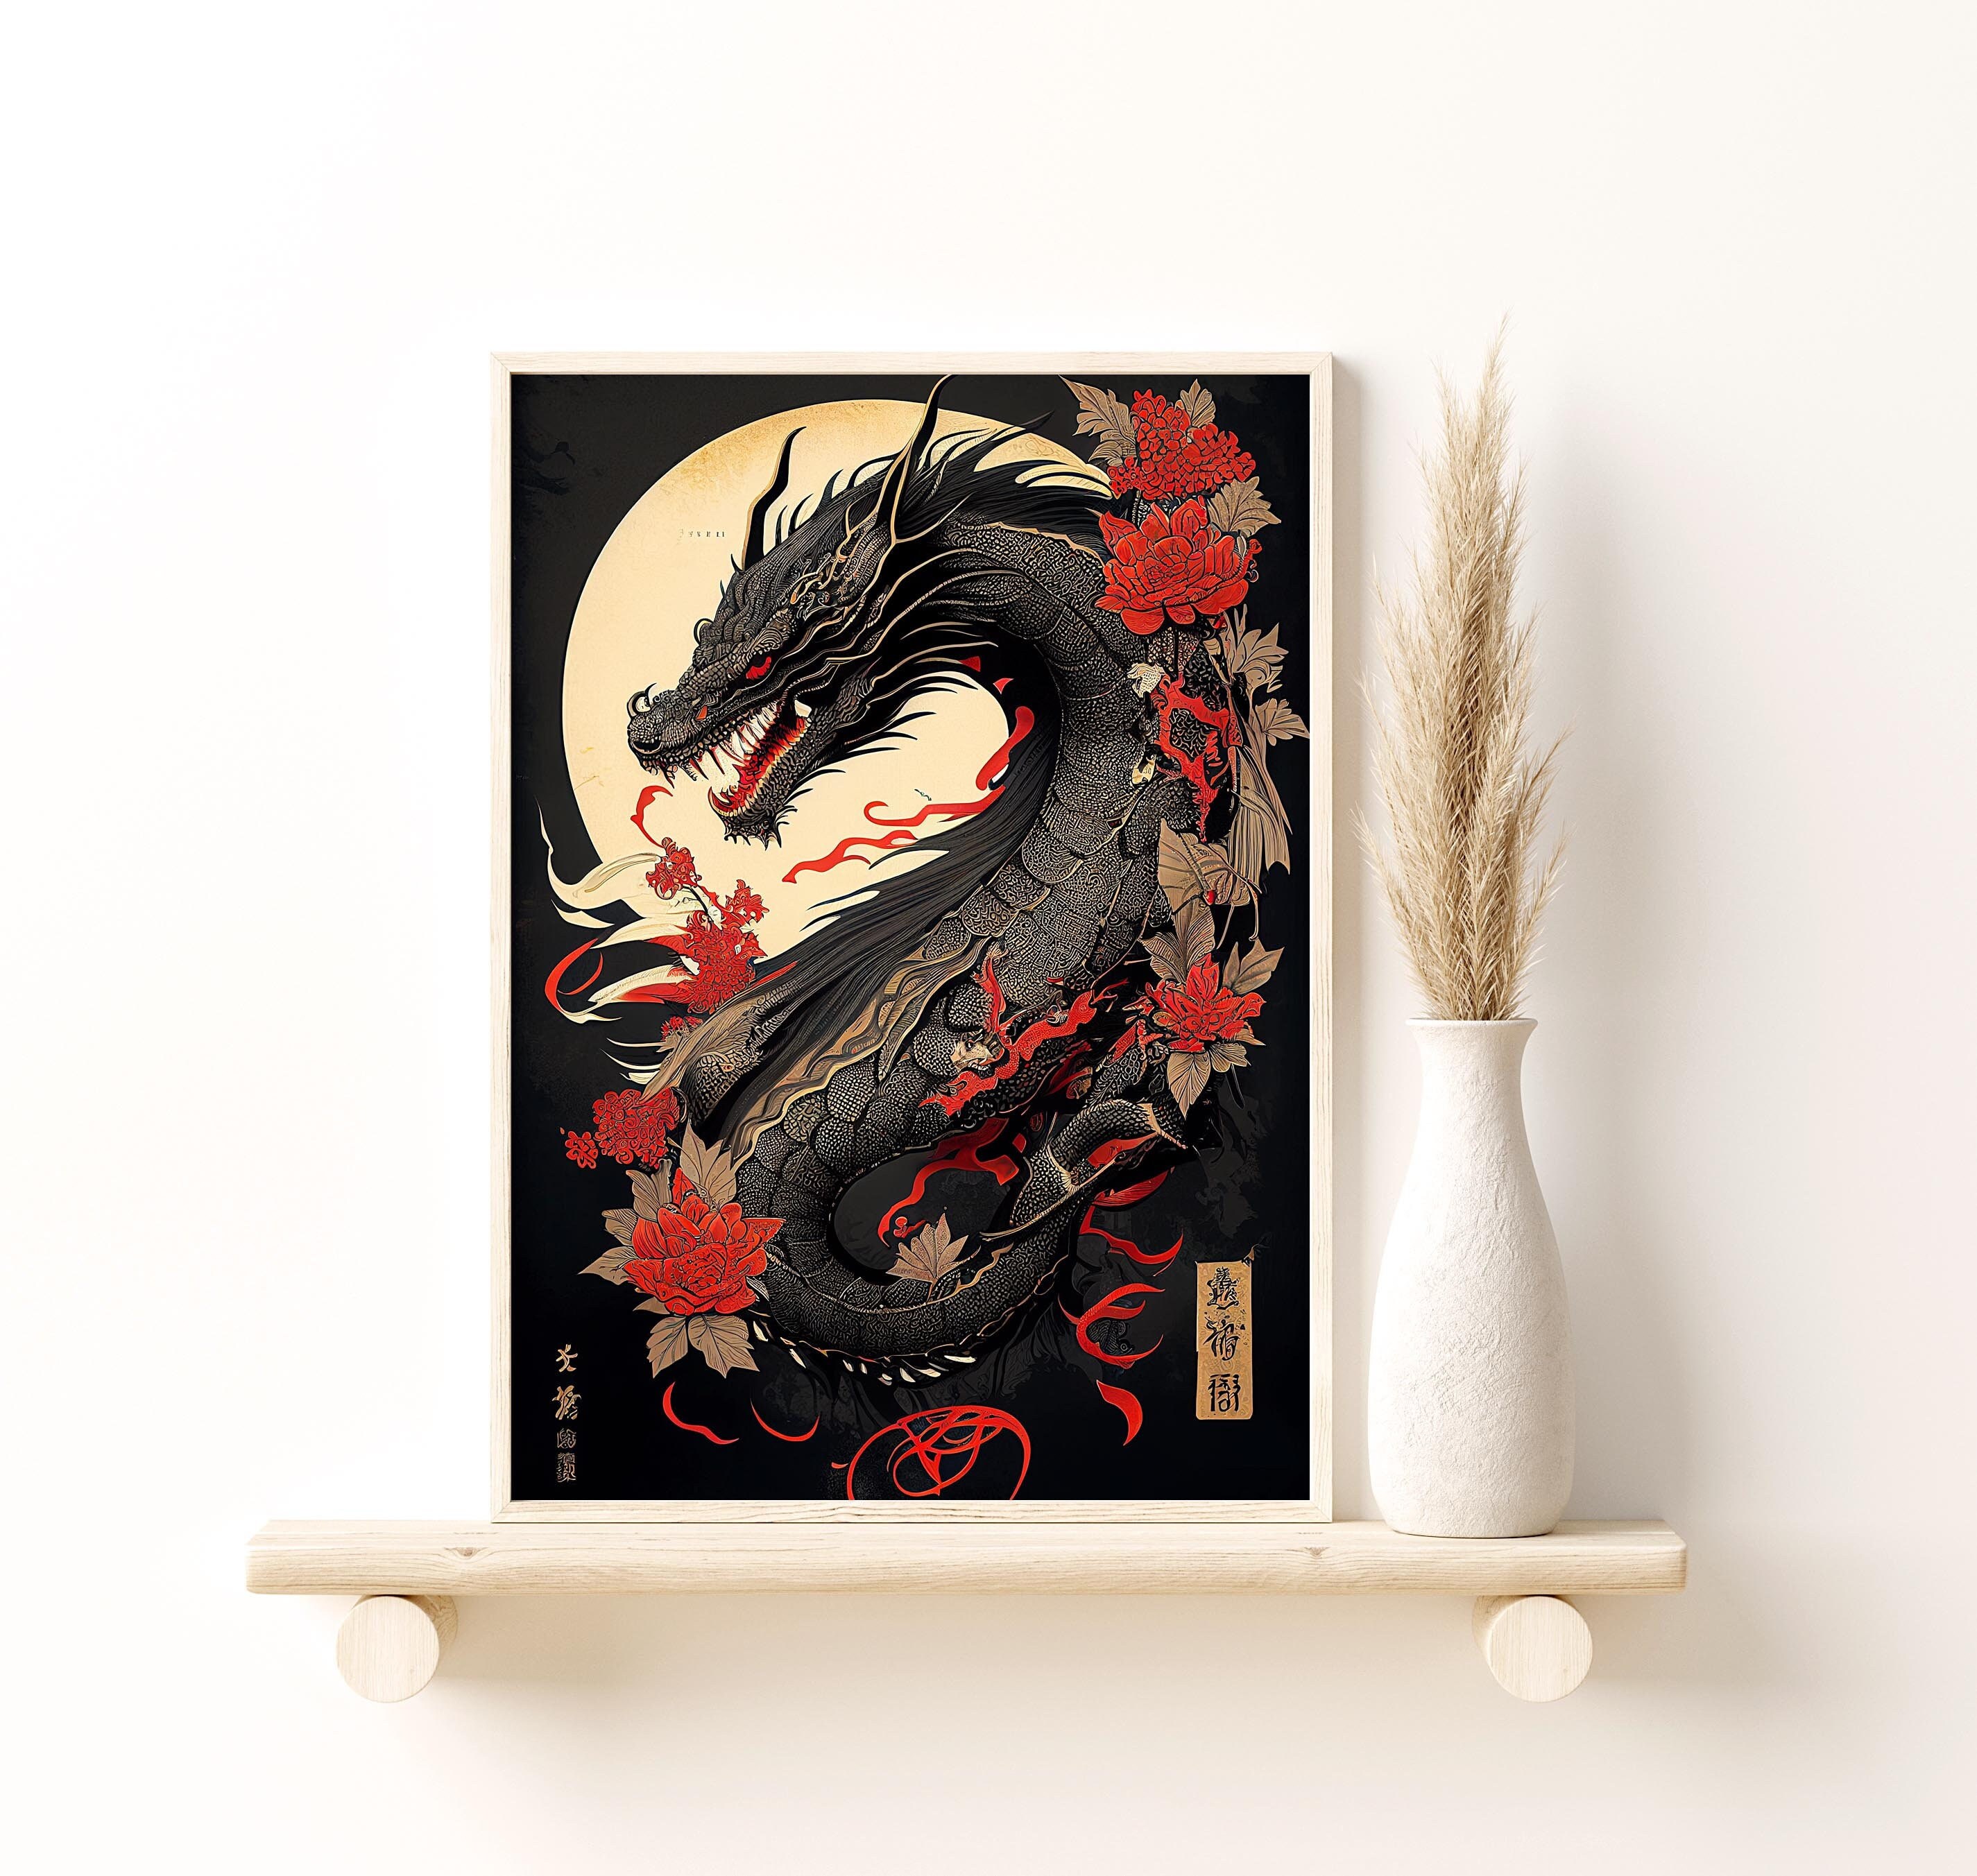 Japanese Movie Poster - Giant Breasts Dragon' Giclee Print